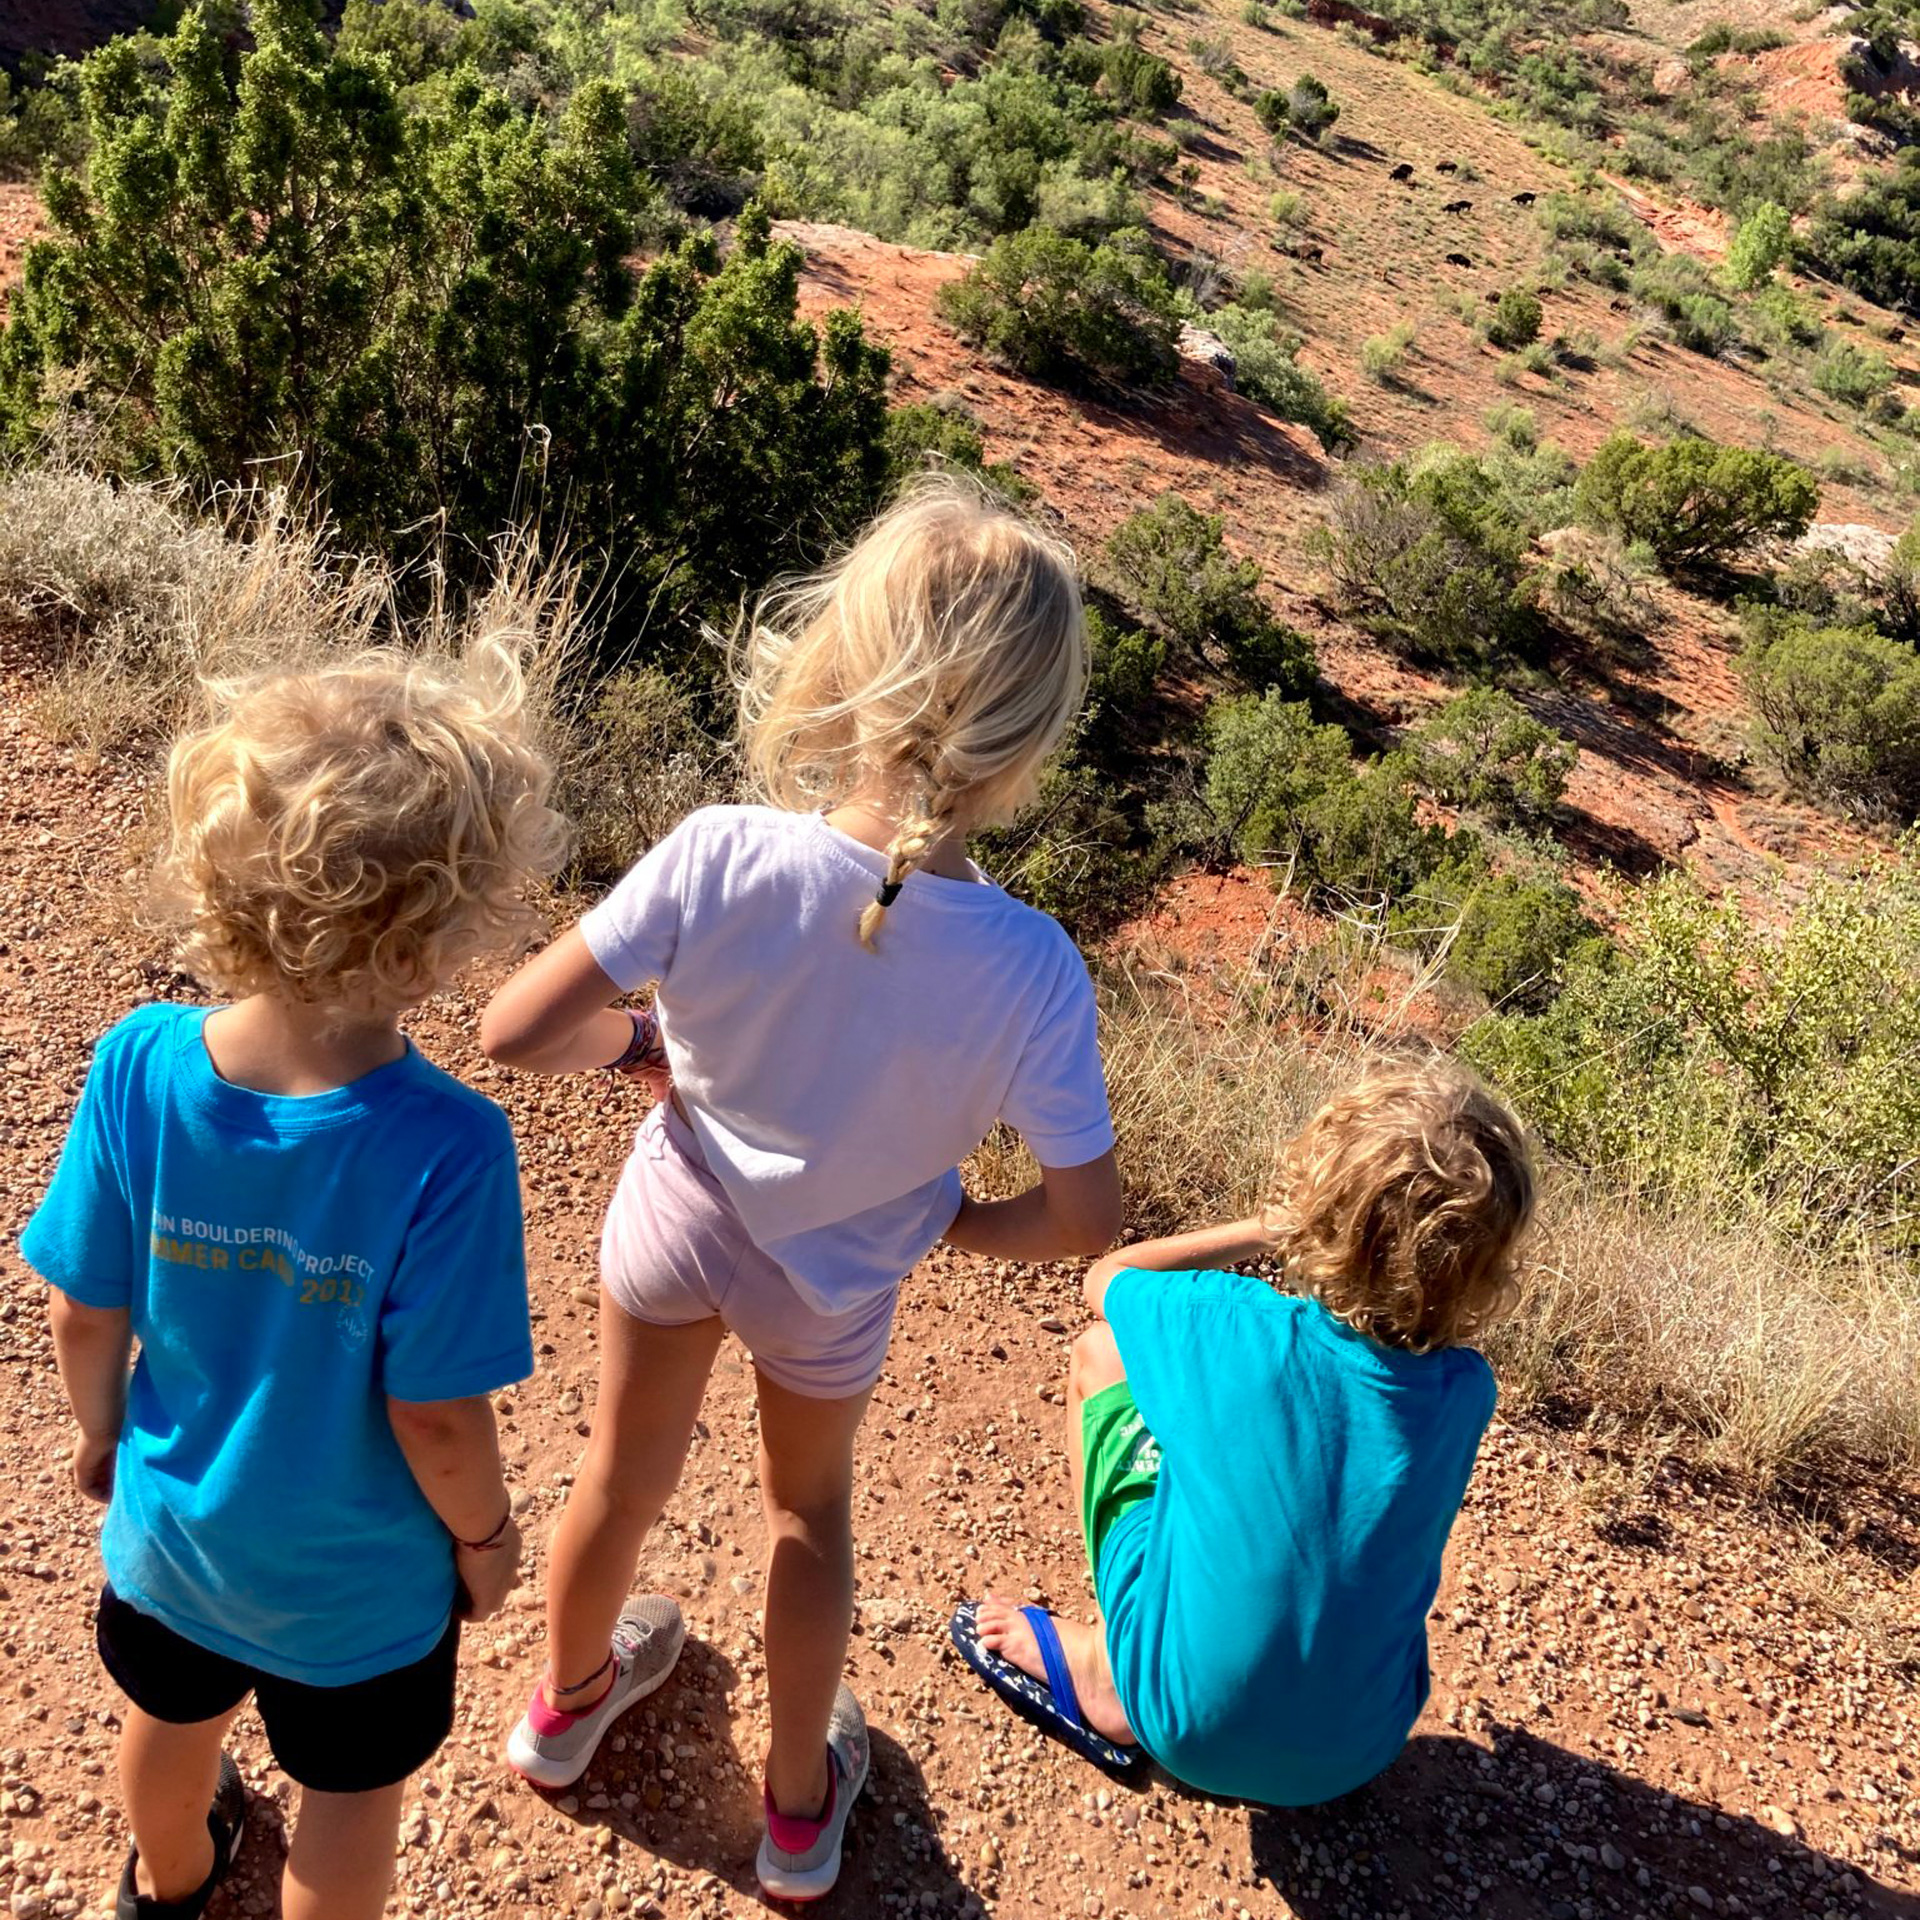 3 kids standing and sitting in a desert looking out at the view on a mountain